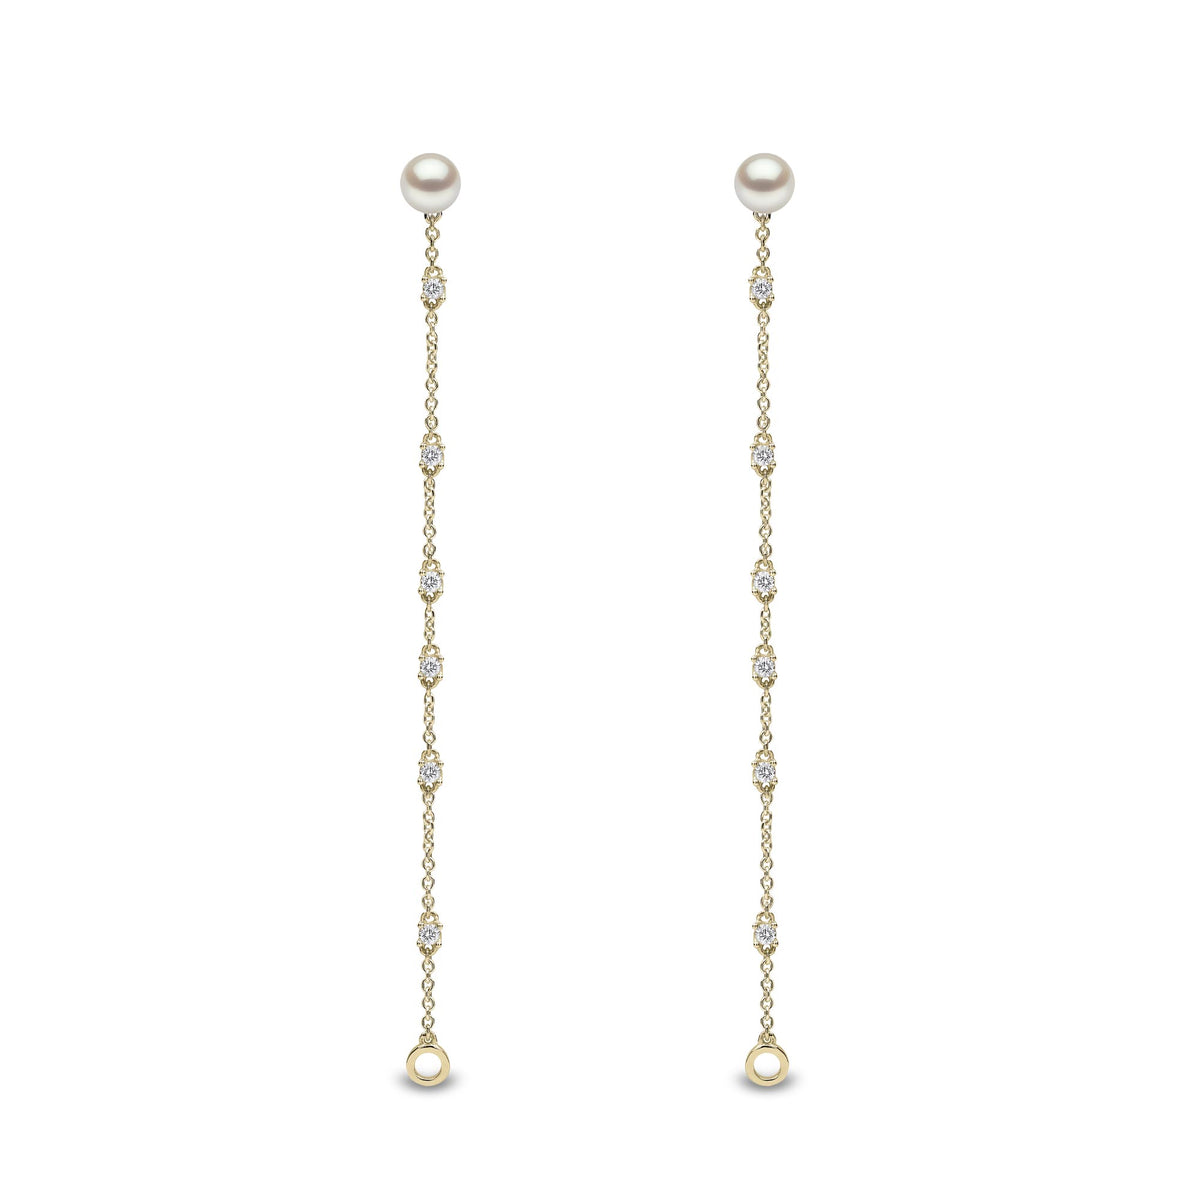 Trend Freshwater Pearl and Diamond Earrings in 18ct Gold